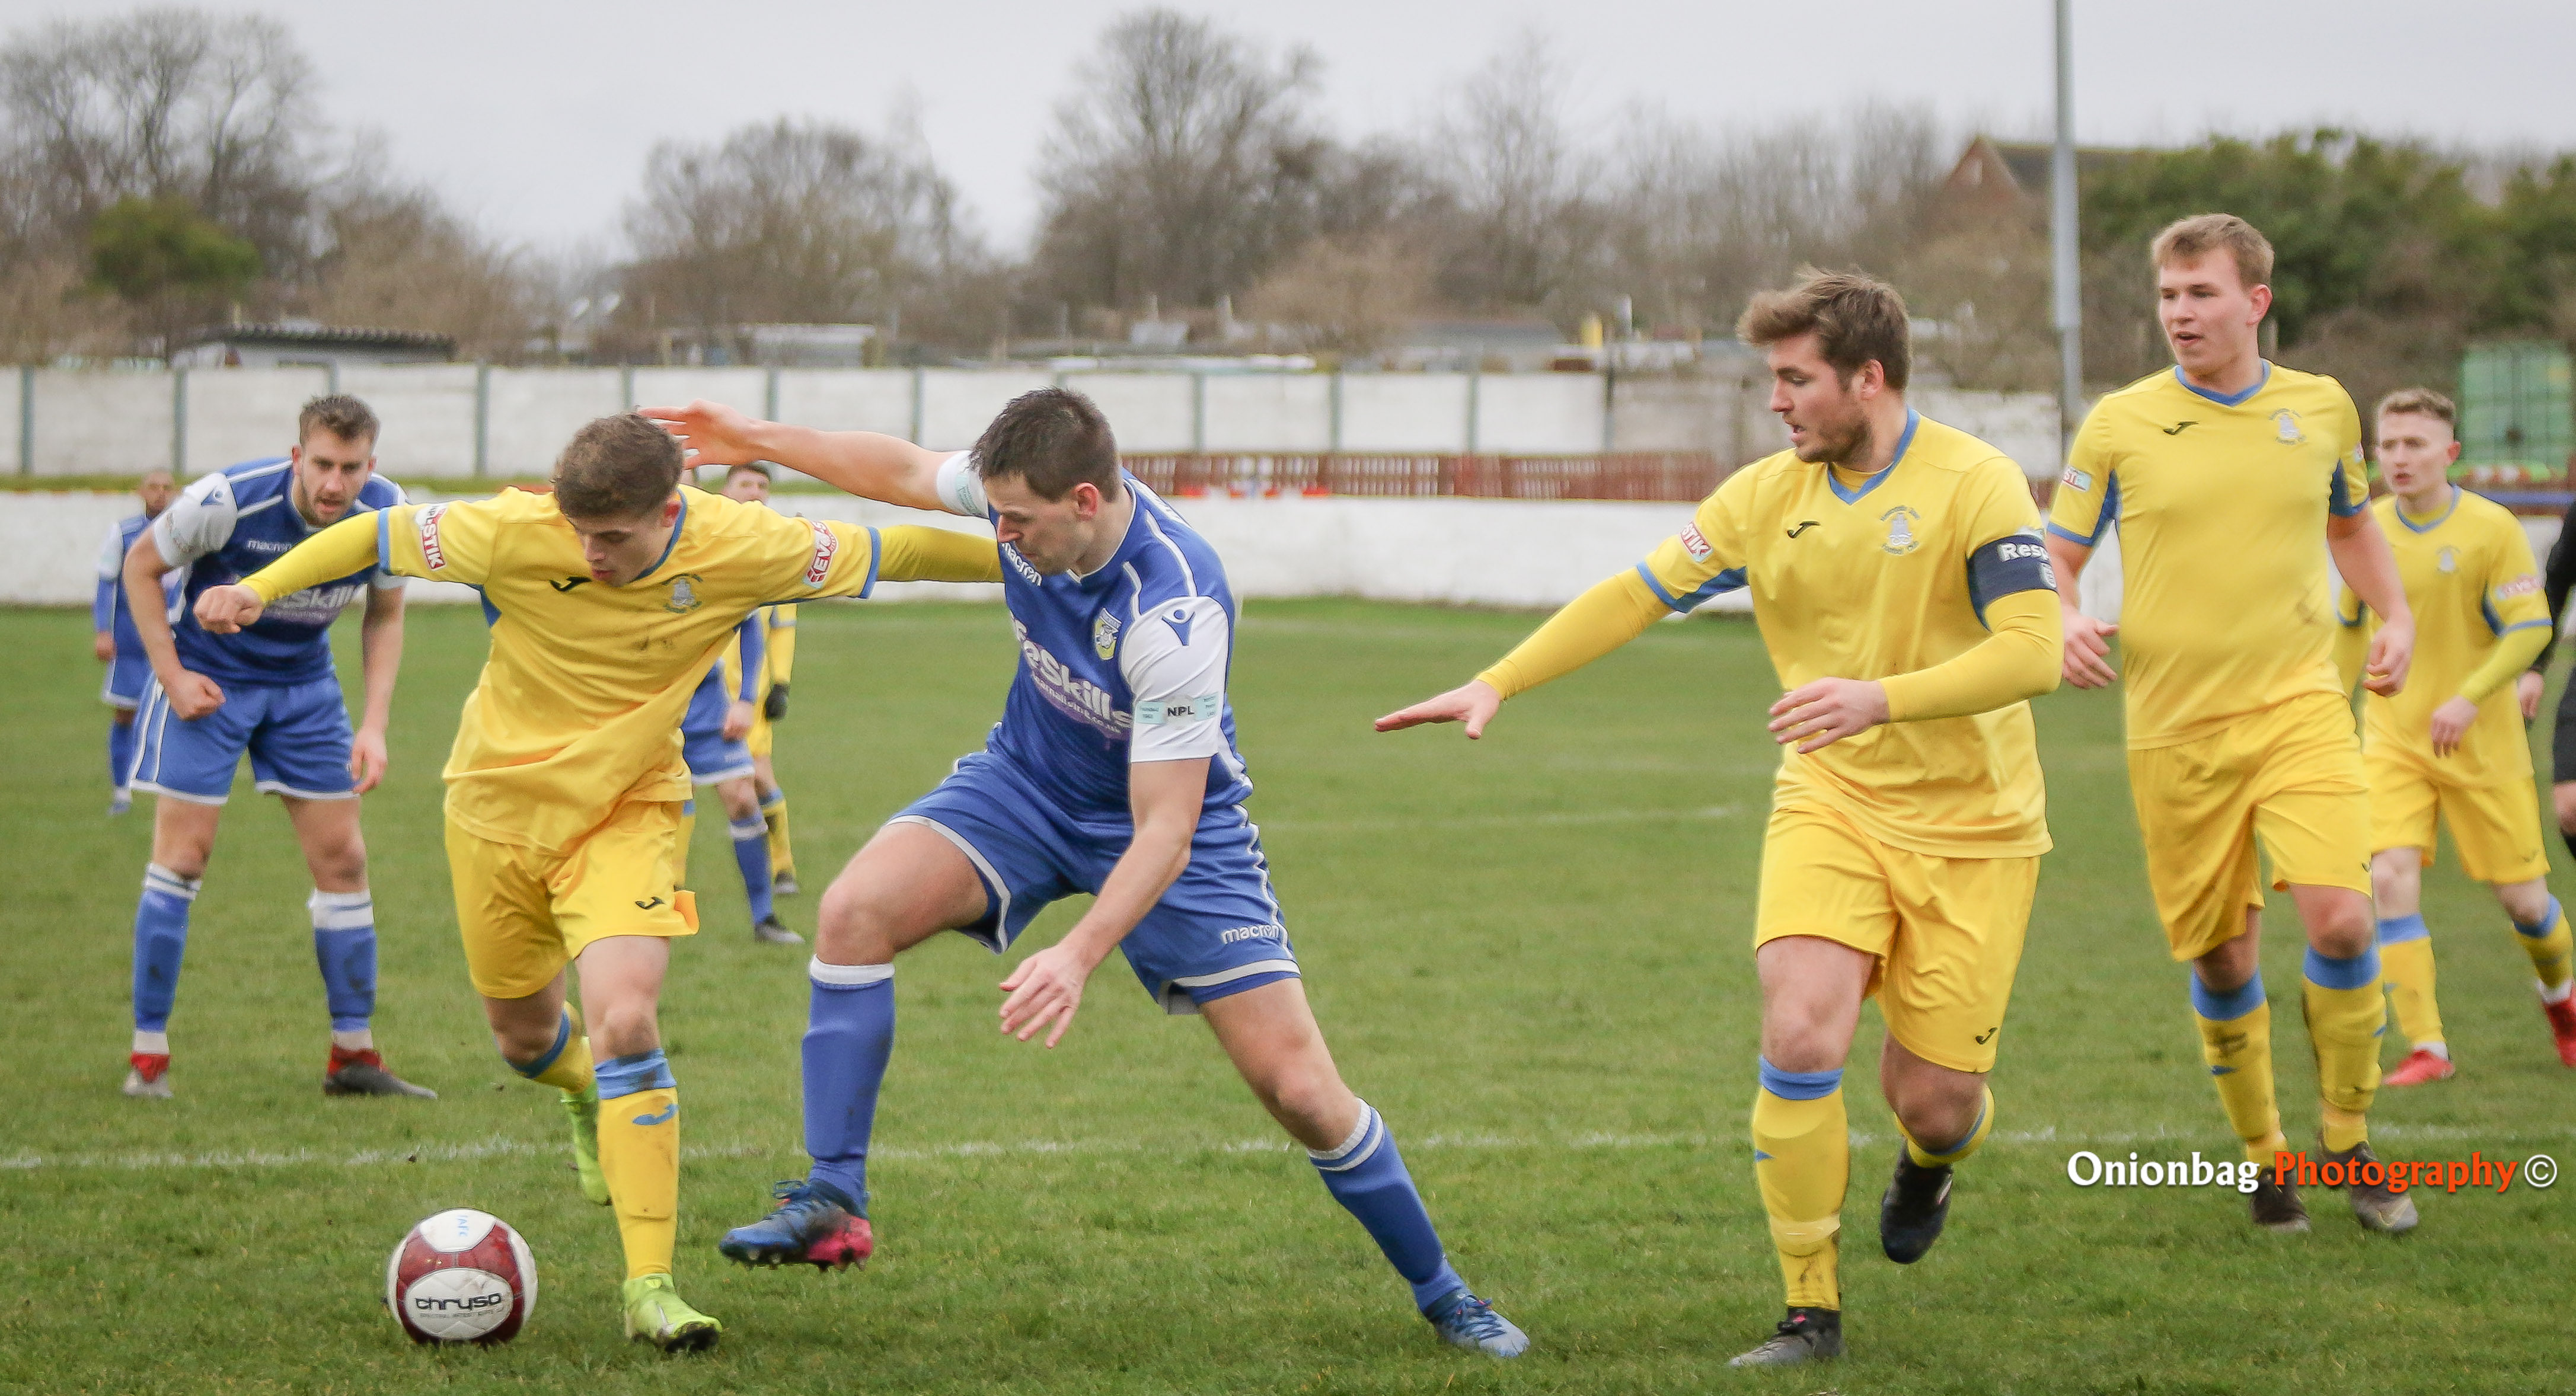 Match Photos : Frickley 0 v Newcastle Town 1